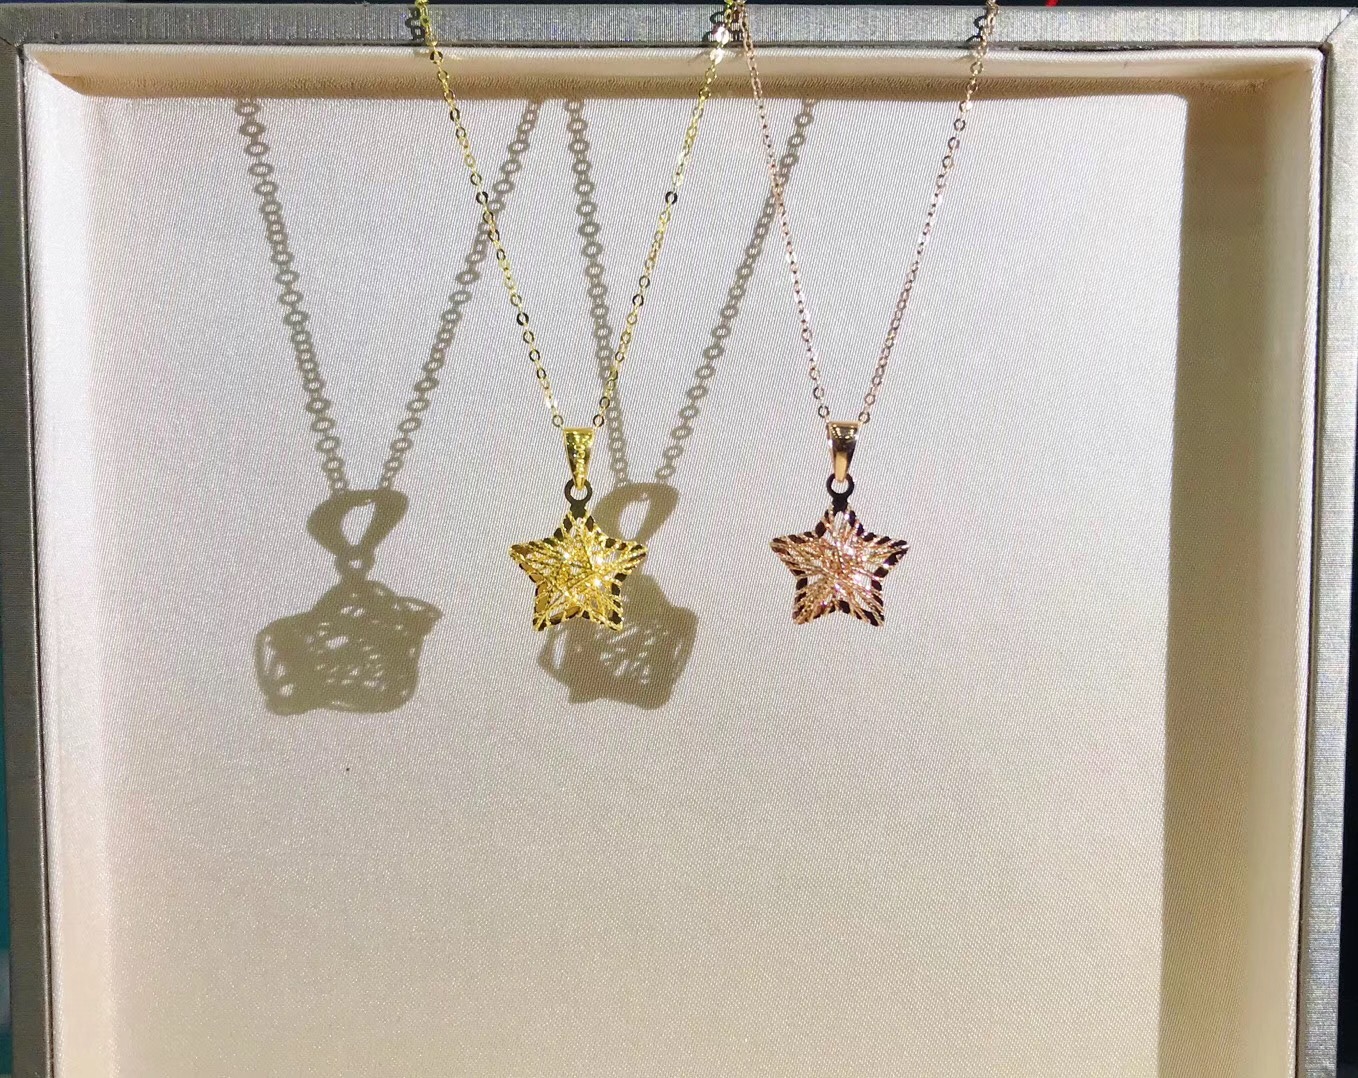 A00020 Star Shaped Necklace in 18k Yellow Gold/18k Rose Gold